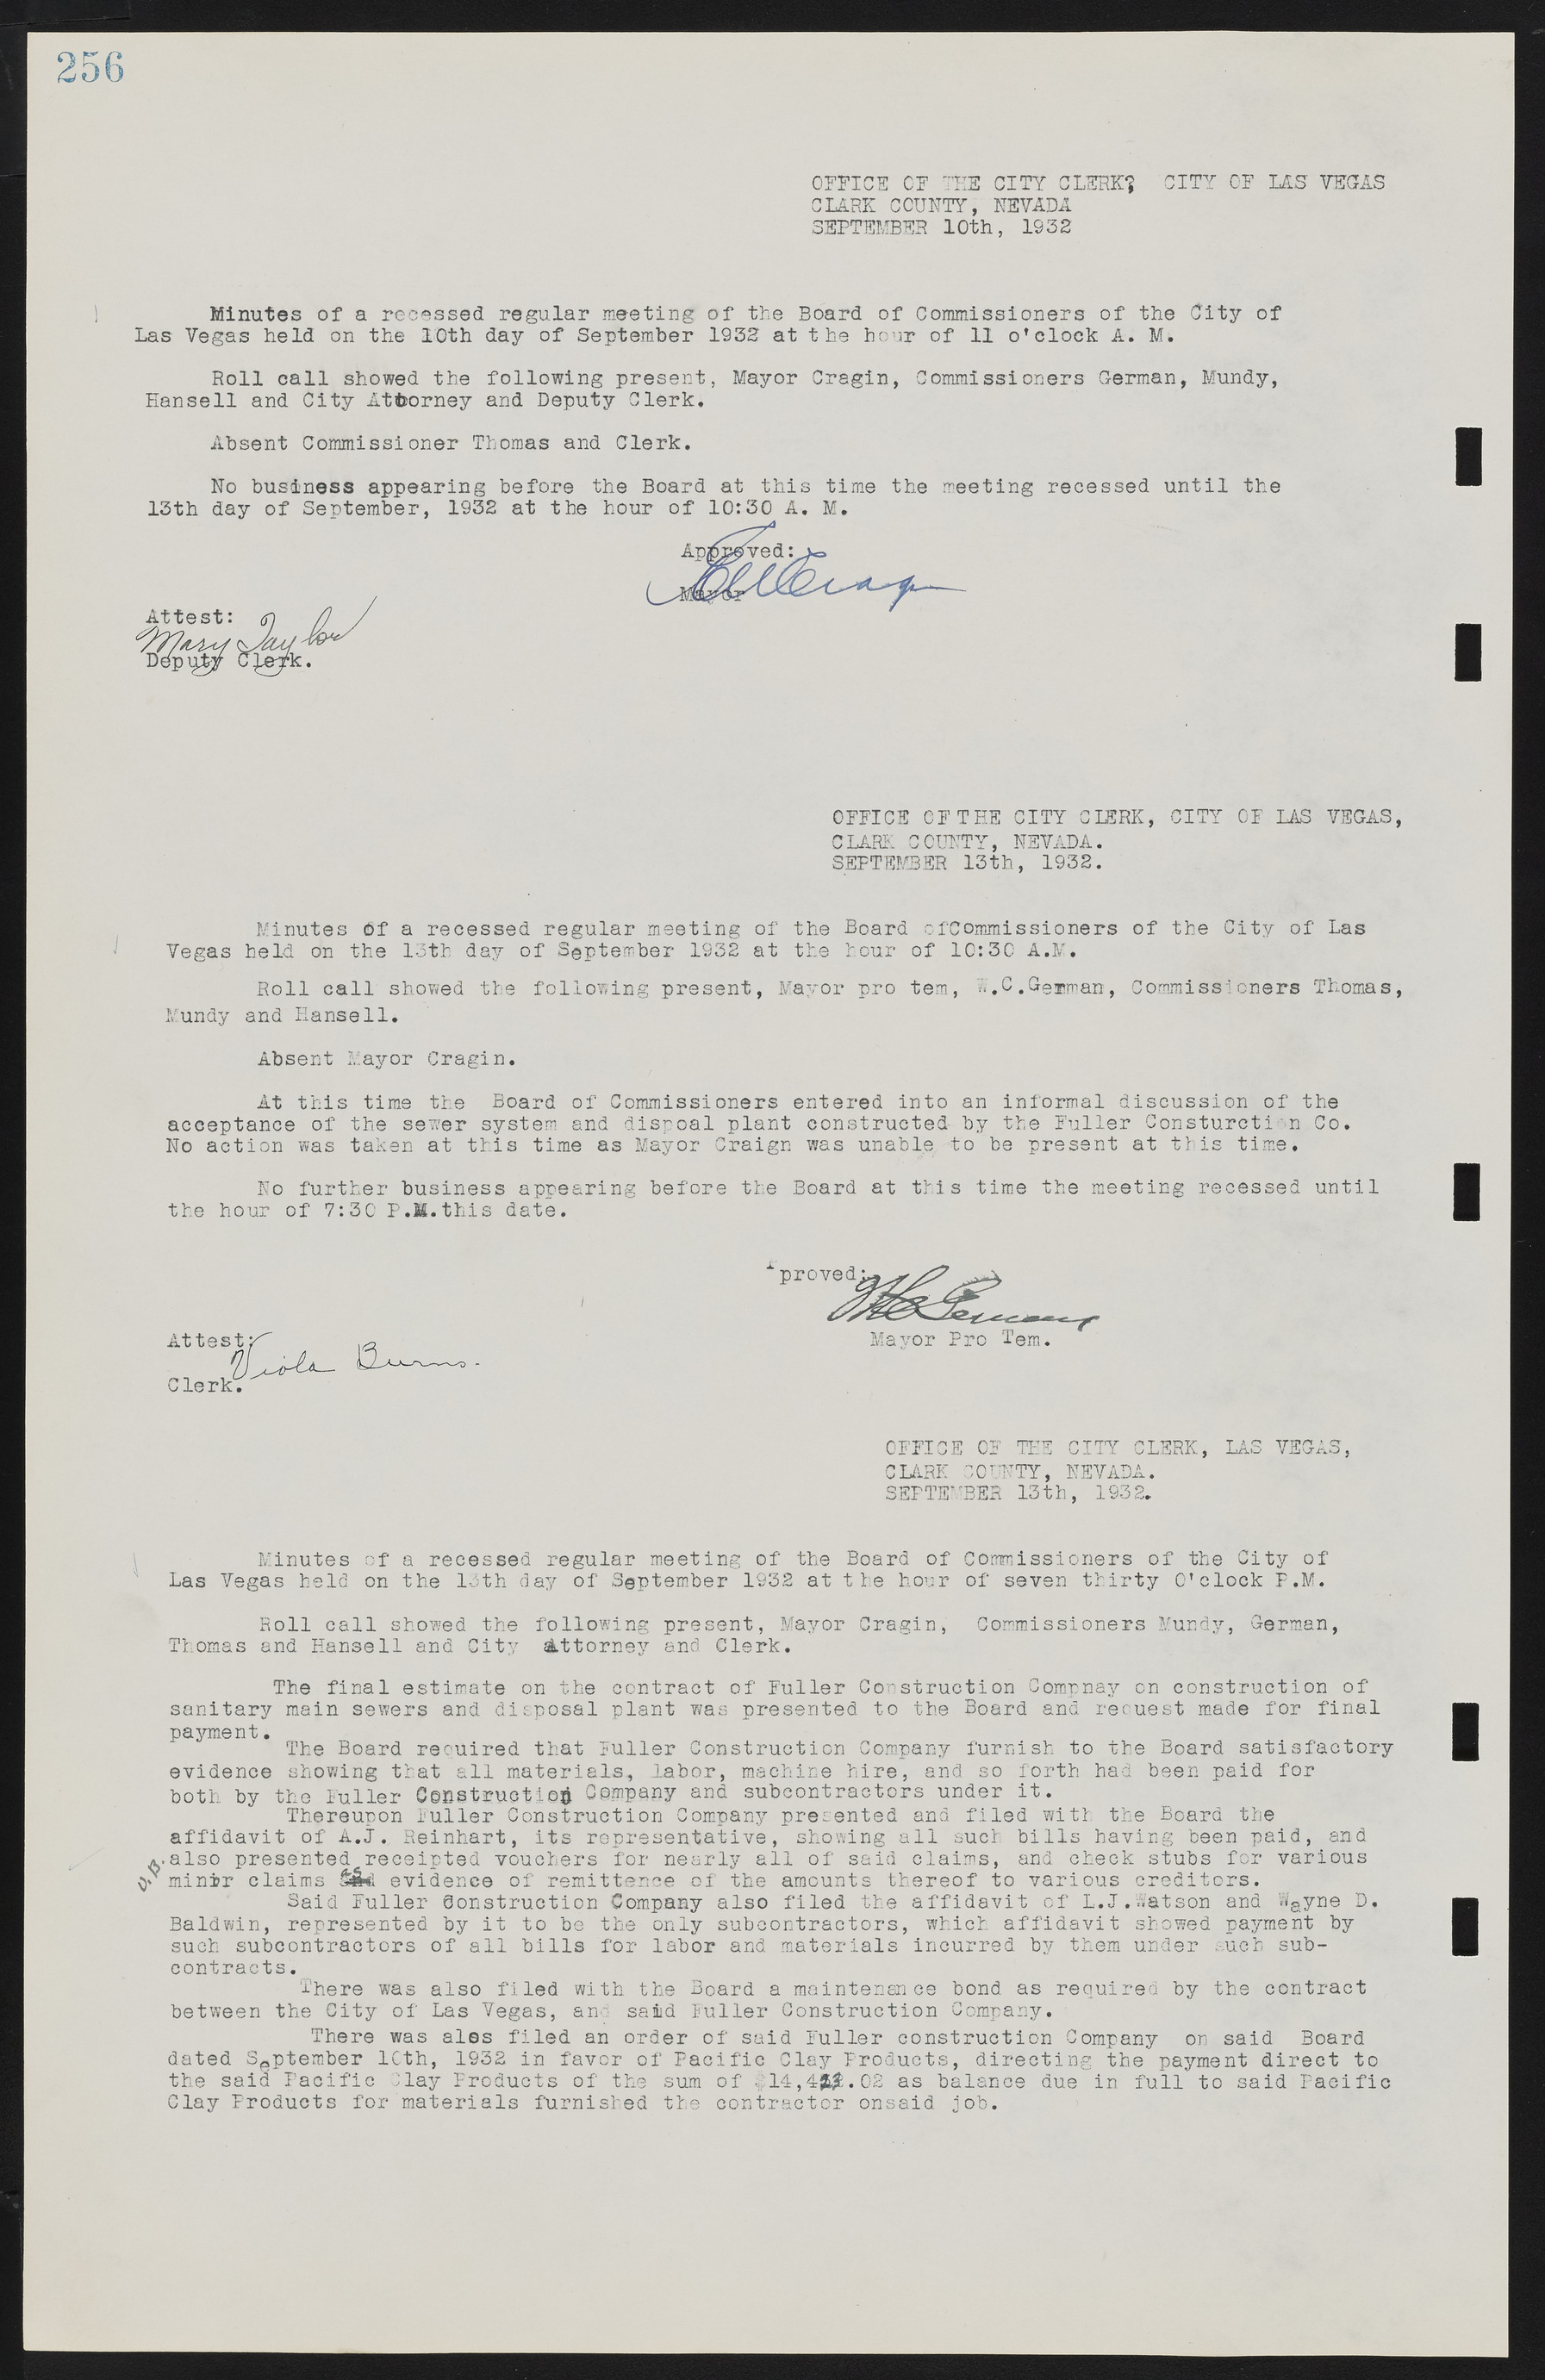 Las Vegas City Commission Minutes, May 14, 1929 to February 11, 1937, lvc000003-262